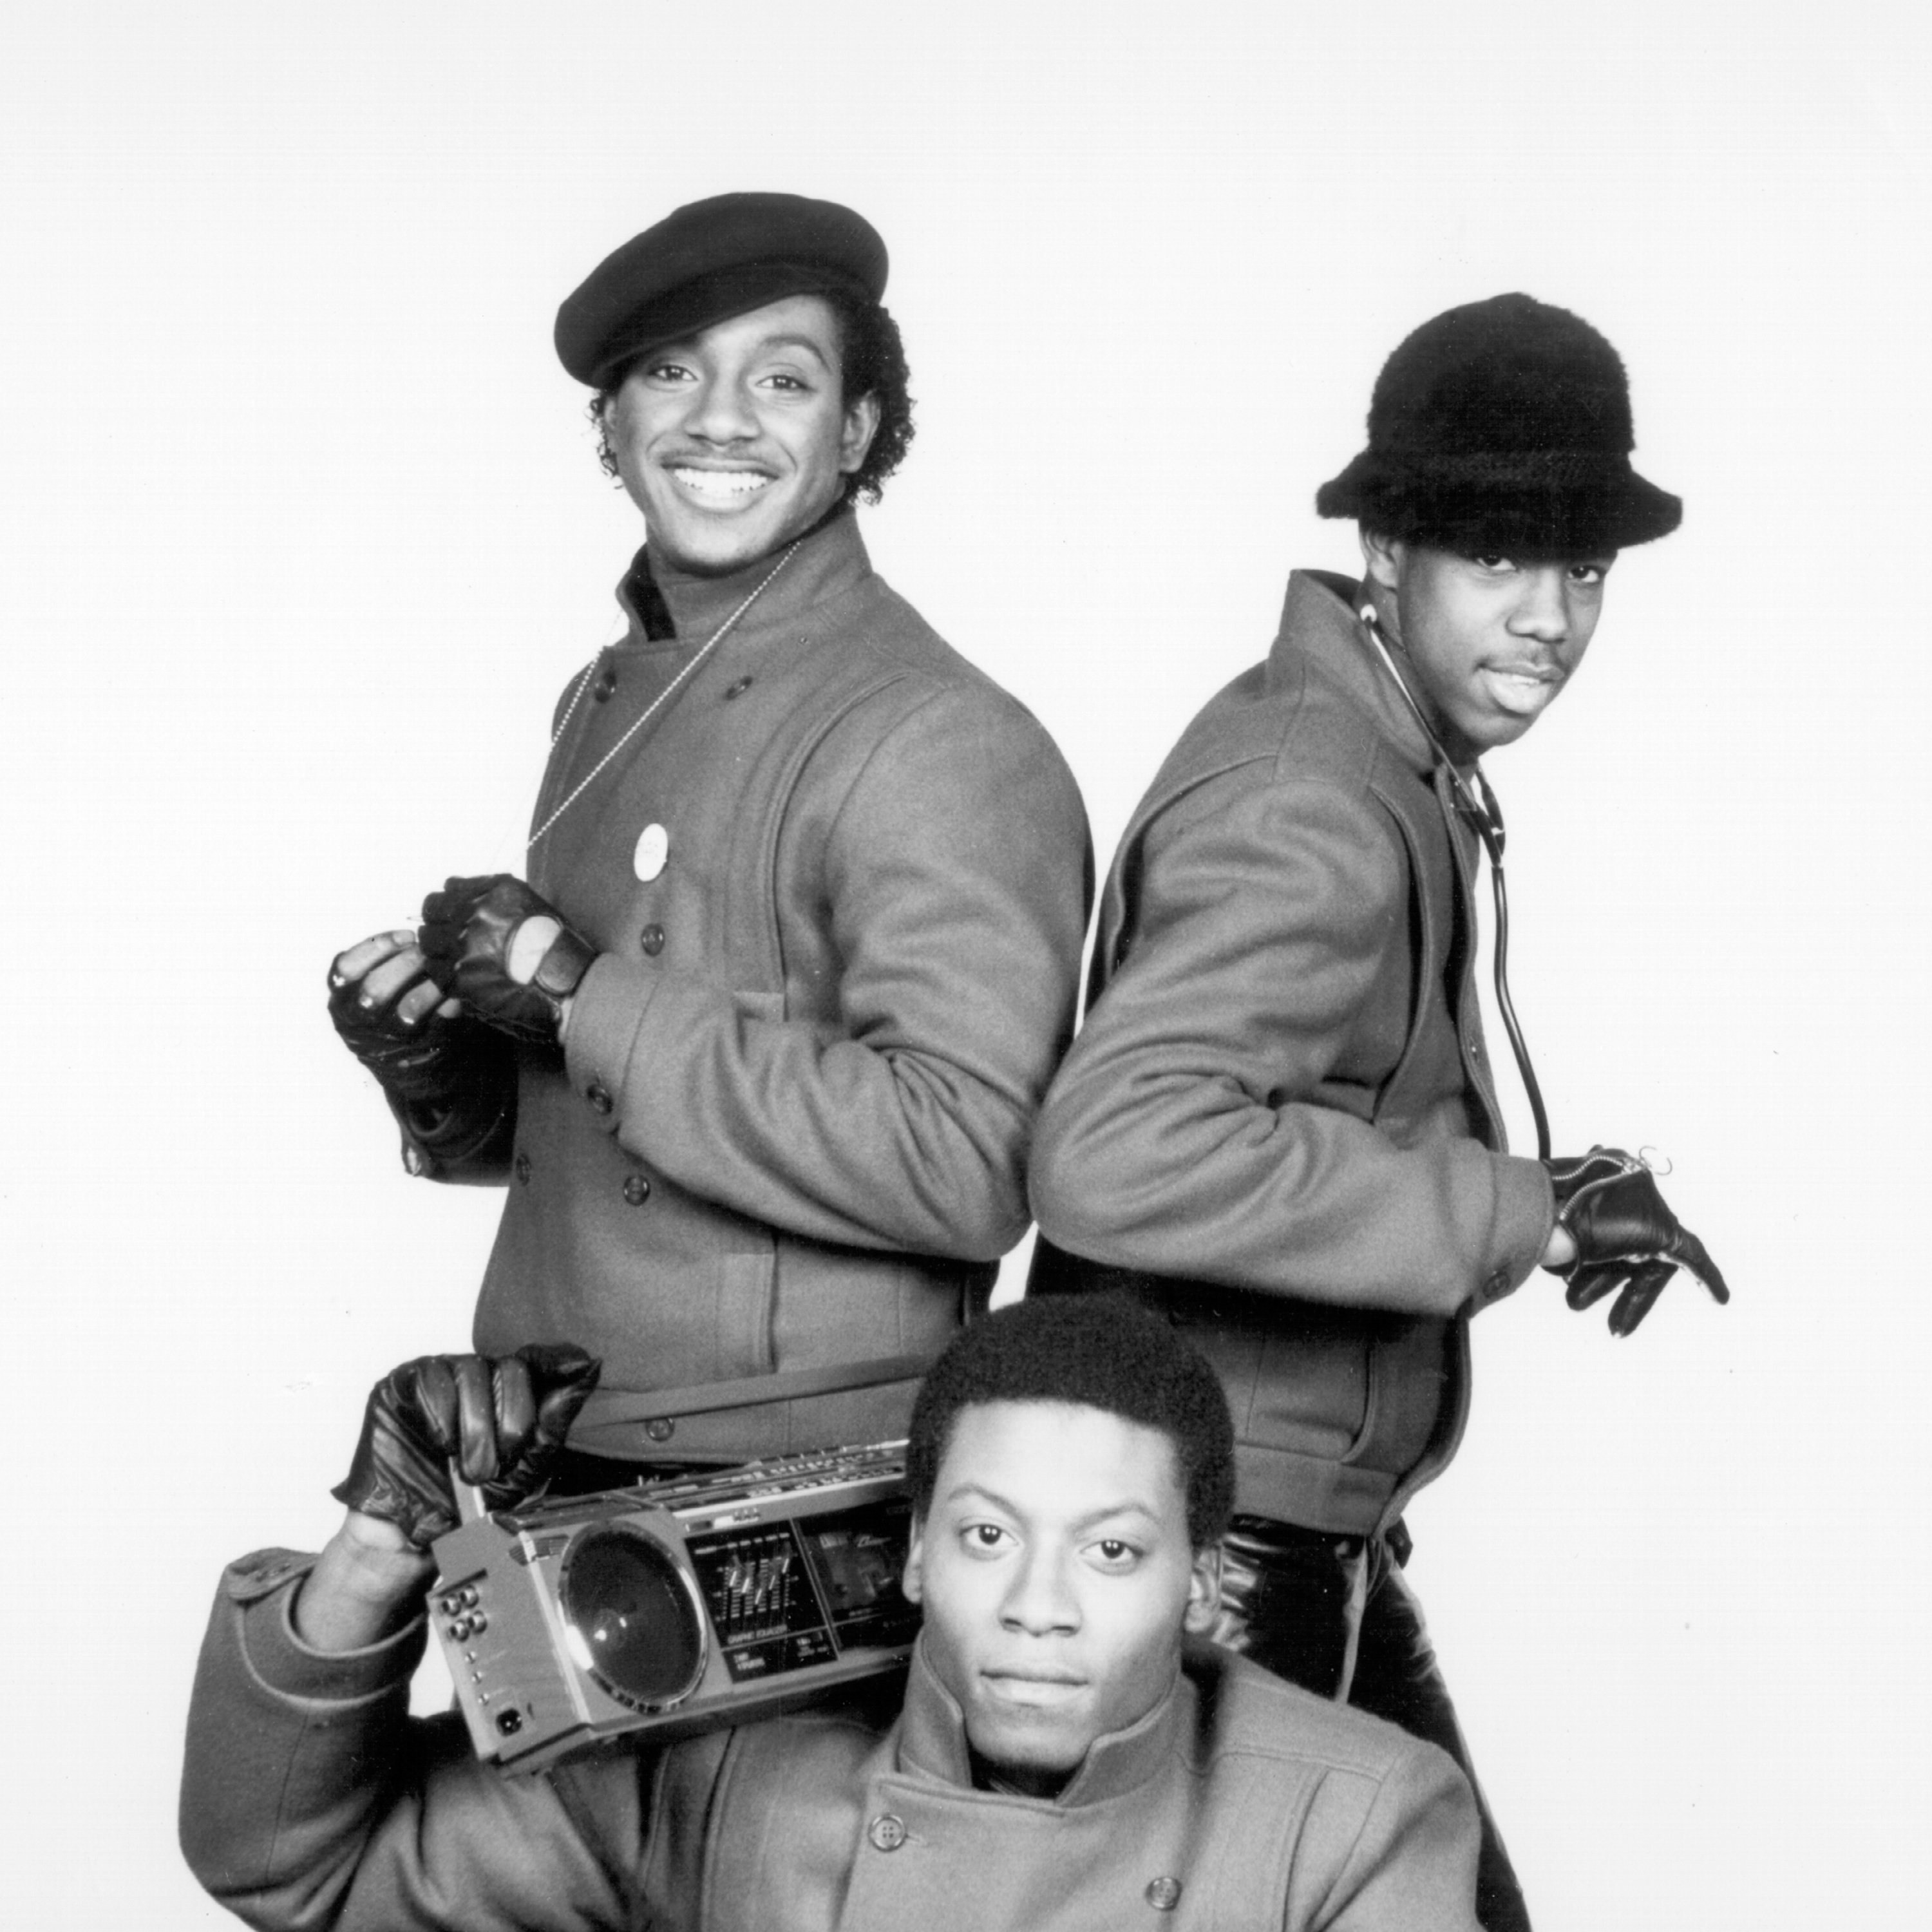 THE EXTRAVAGANT 3: LL COOL J's First Hip-Hop Group